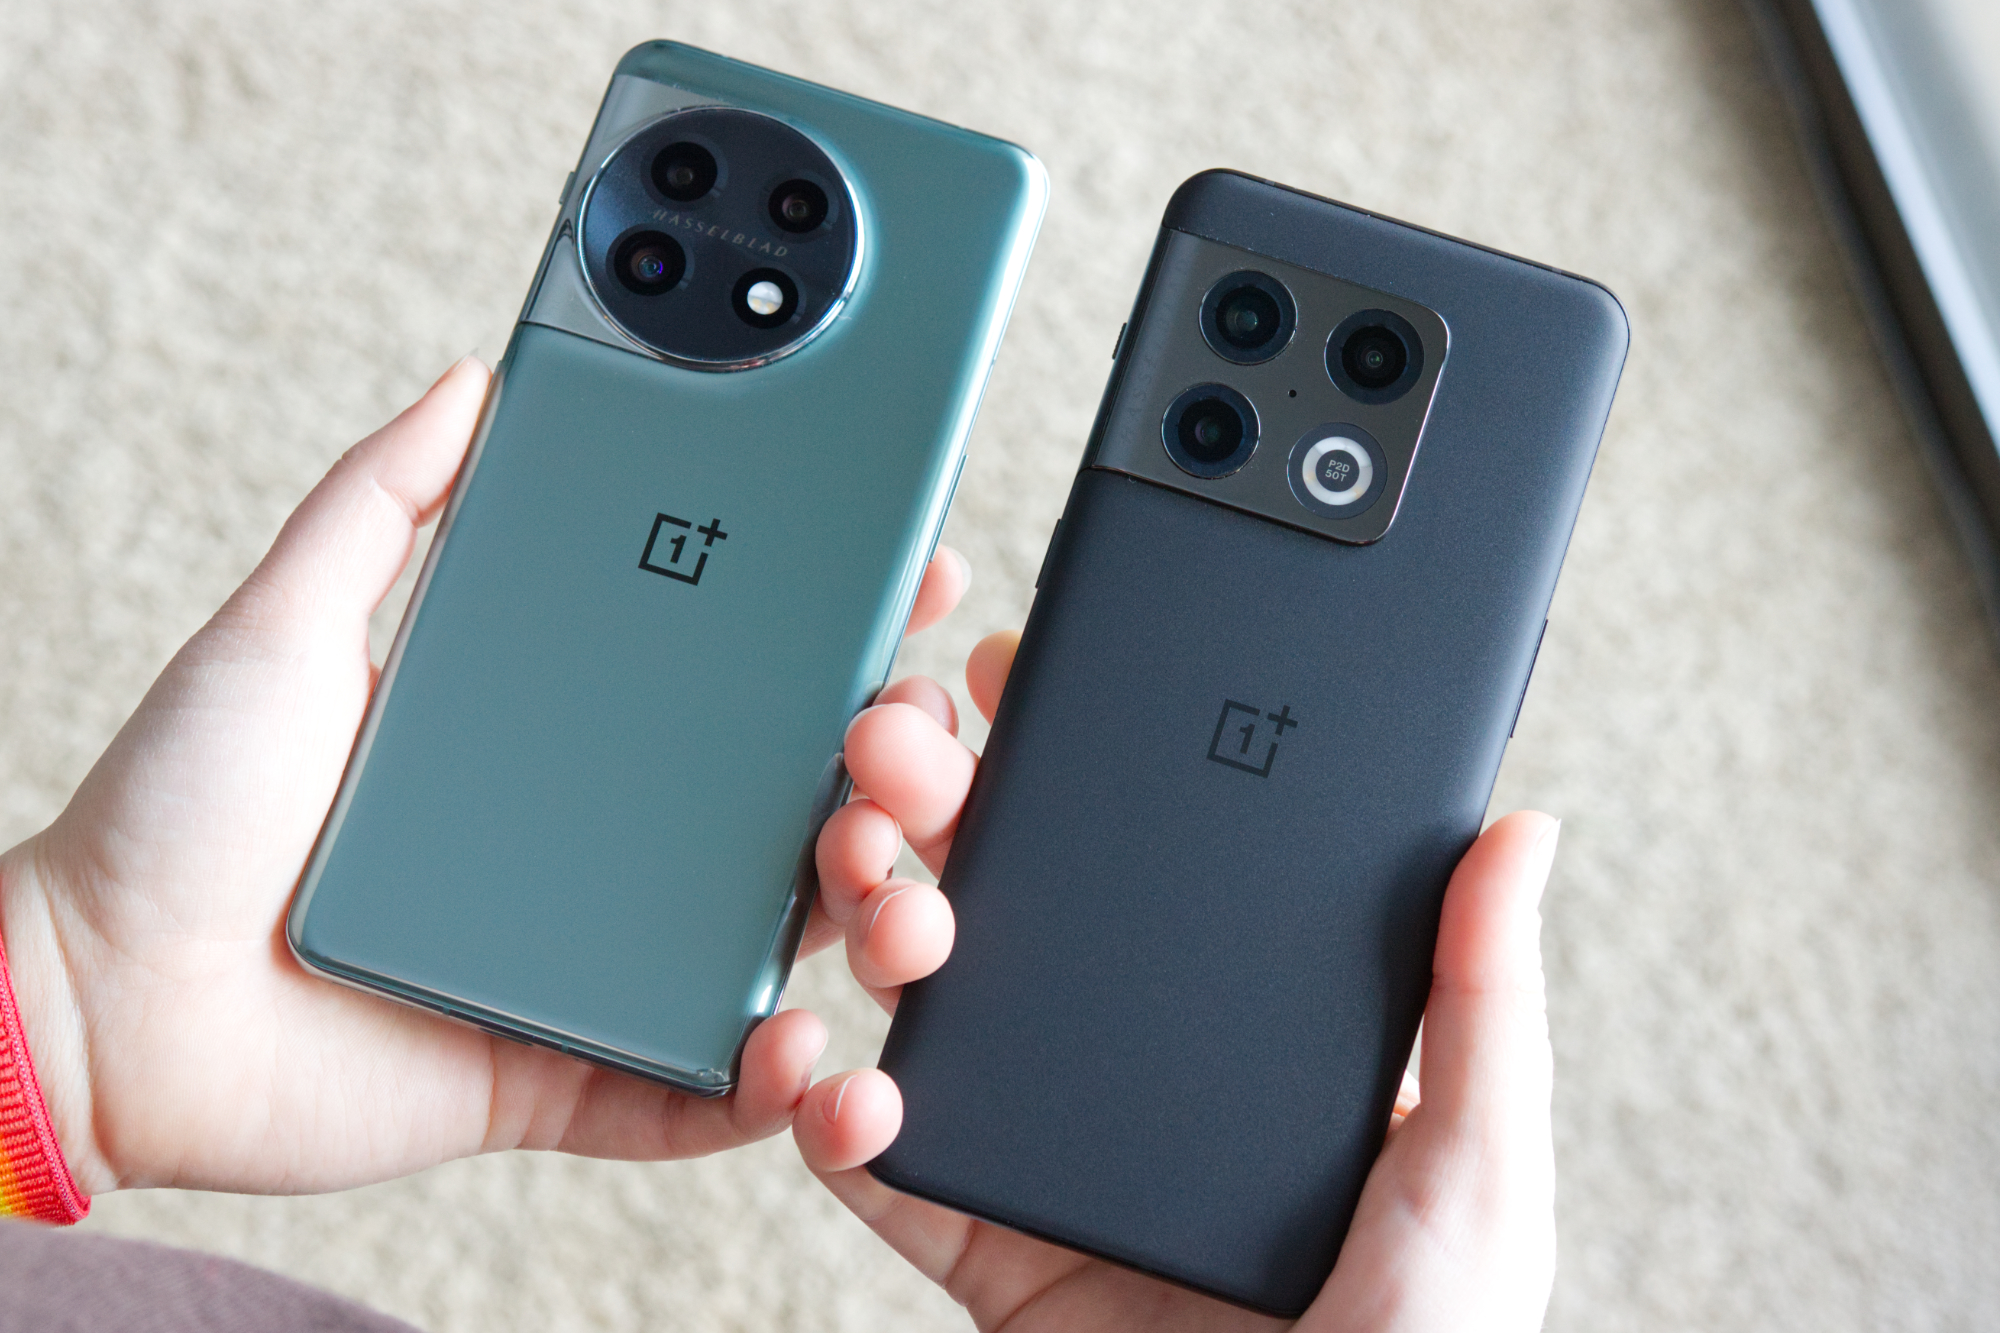 OnePlus 10 Pro vs. OnePlus 9 Pro: What's different?